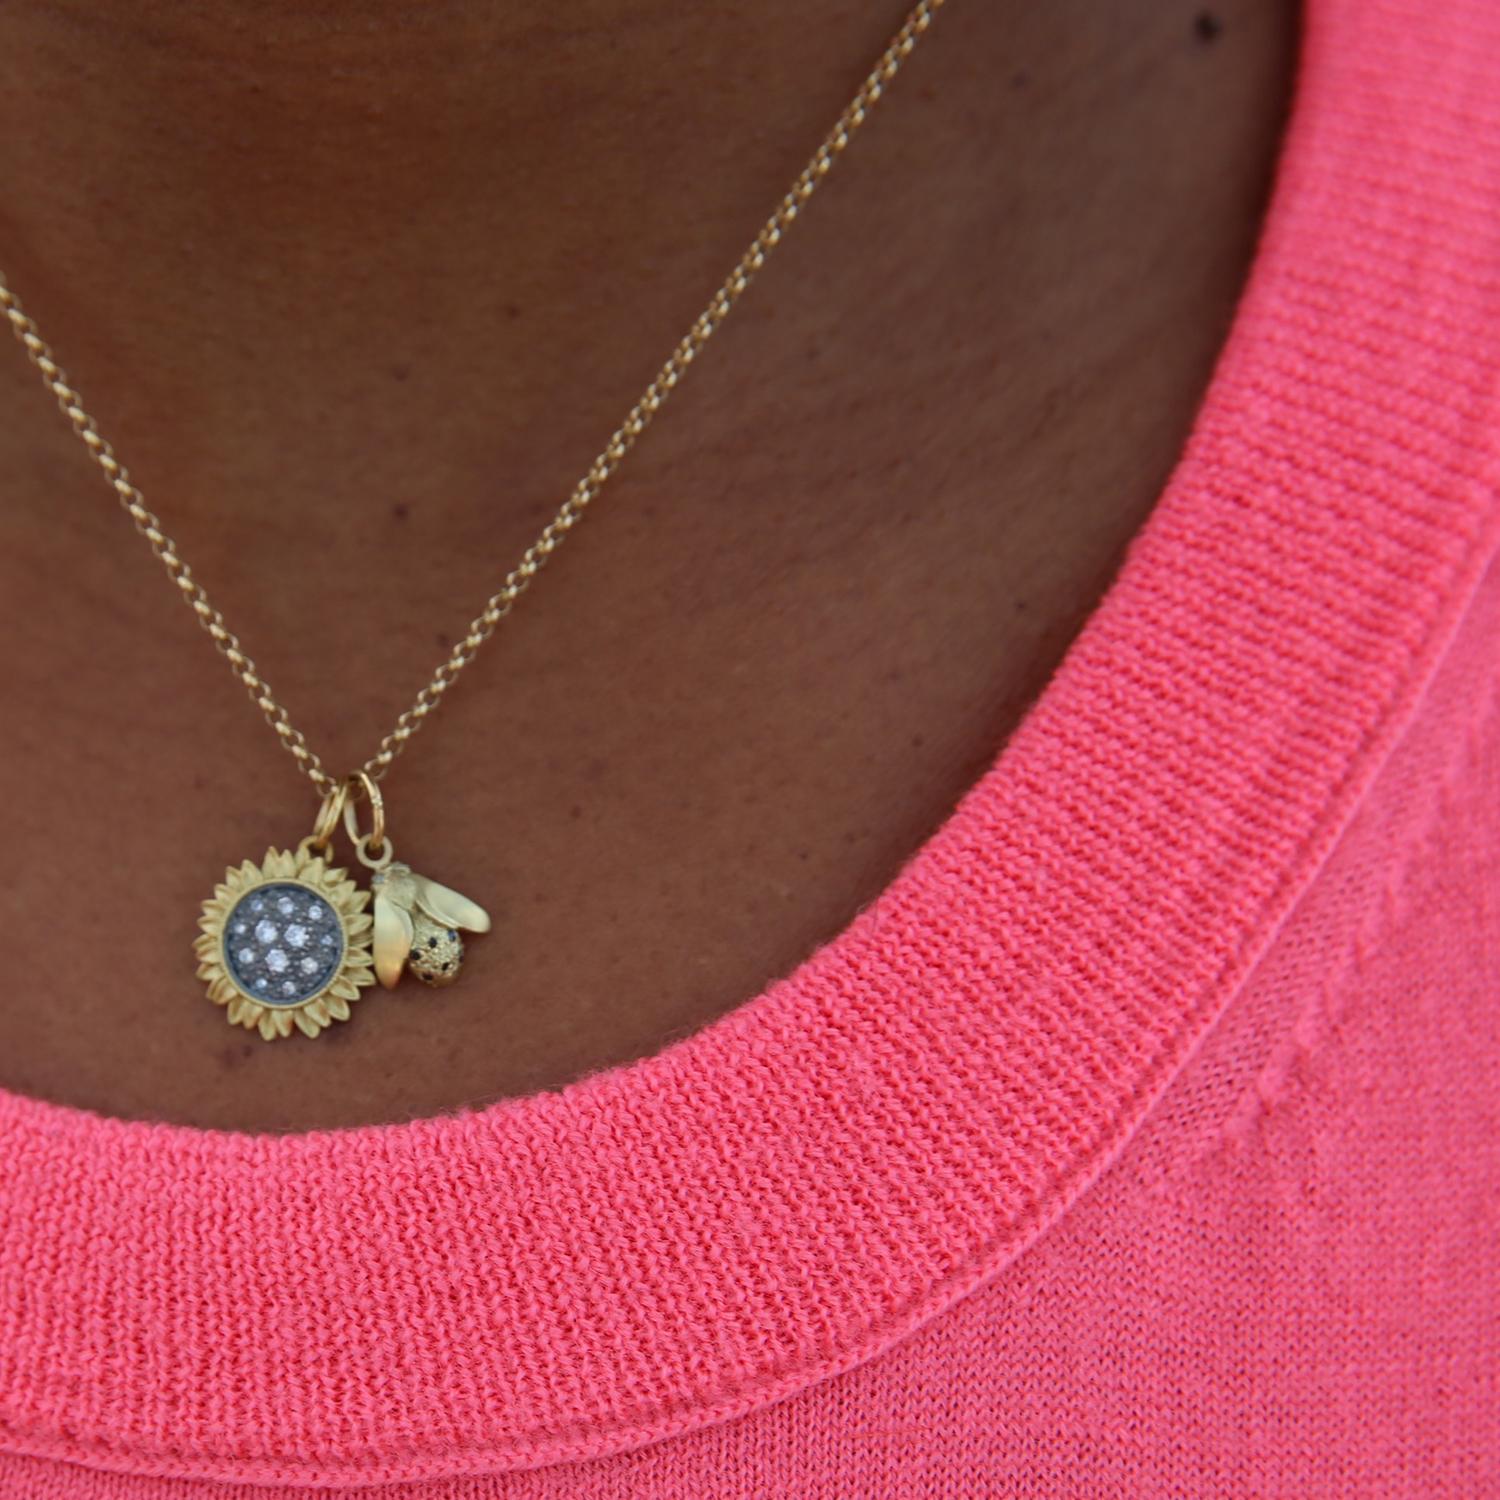 These sparkly sunflowers are even more eye-catching than the real thing!
Our sunflower pendant has 18k yellow gold petals surrounding diamonds pave set in oxidized sterling silver. The delicate flower hangs from a 16-inch 14k yellow gold chain. 